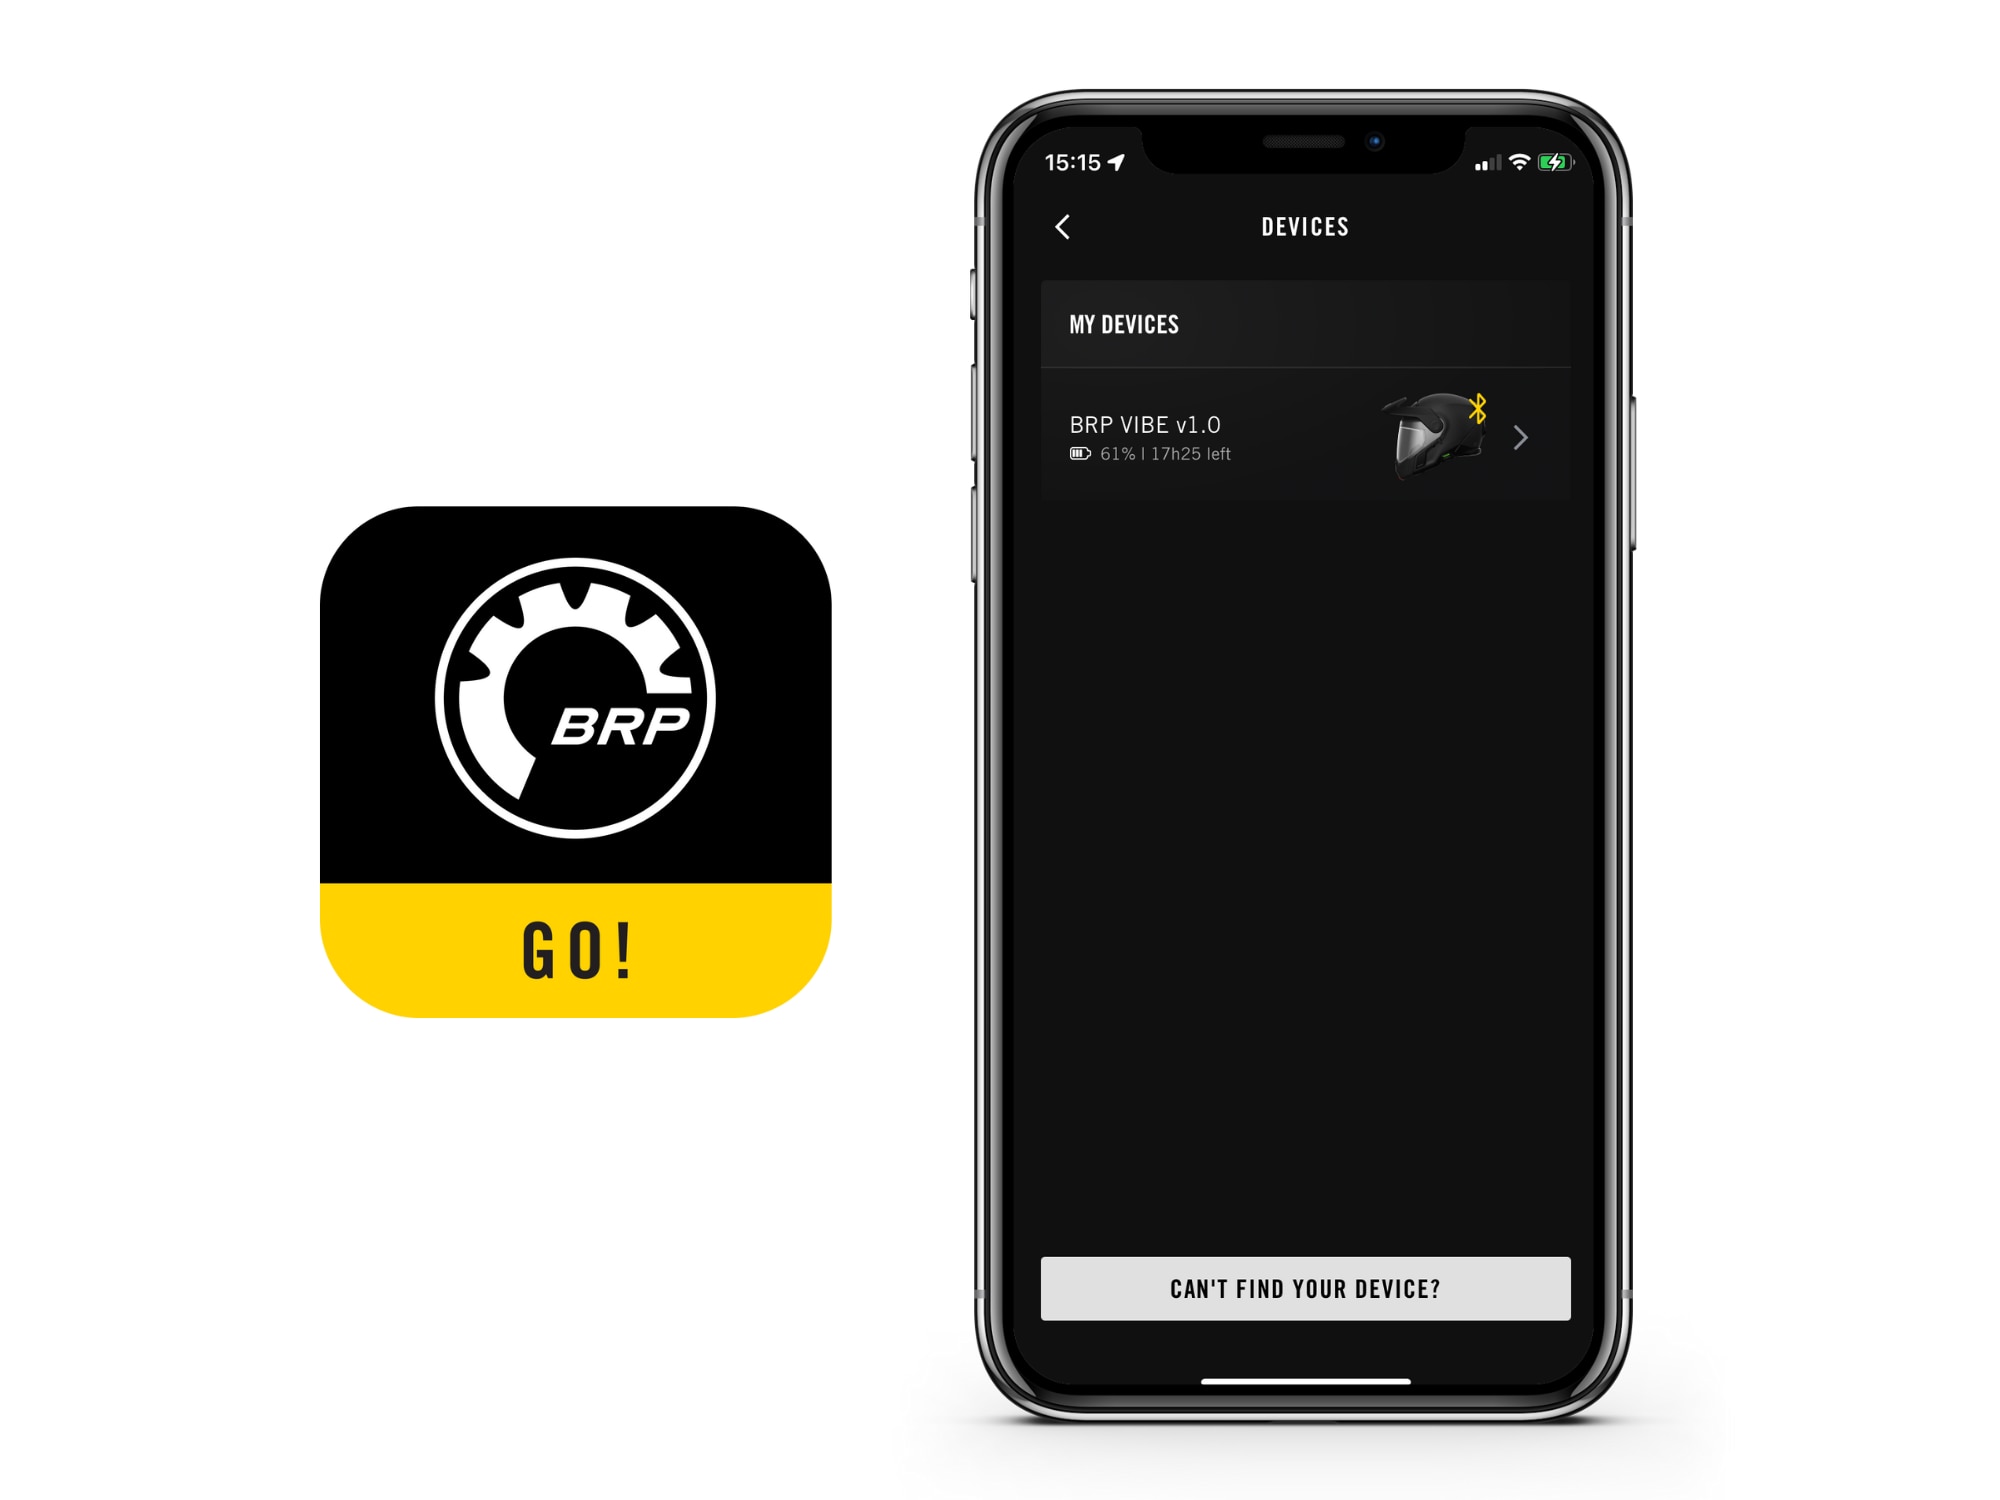 The BRP GO! app showing the Devices screen for Vibe communication system